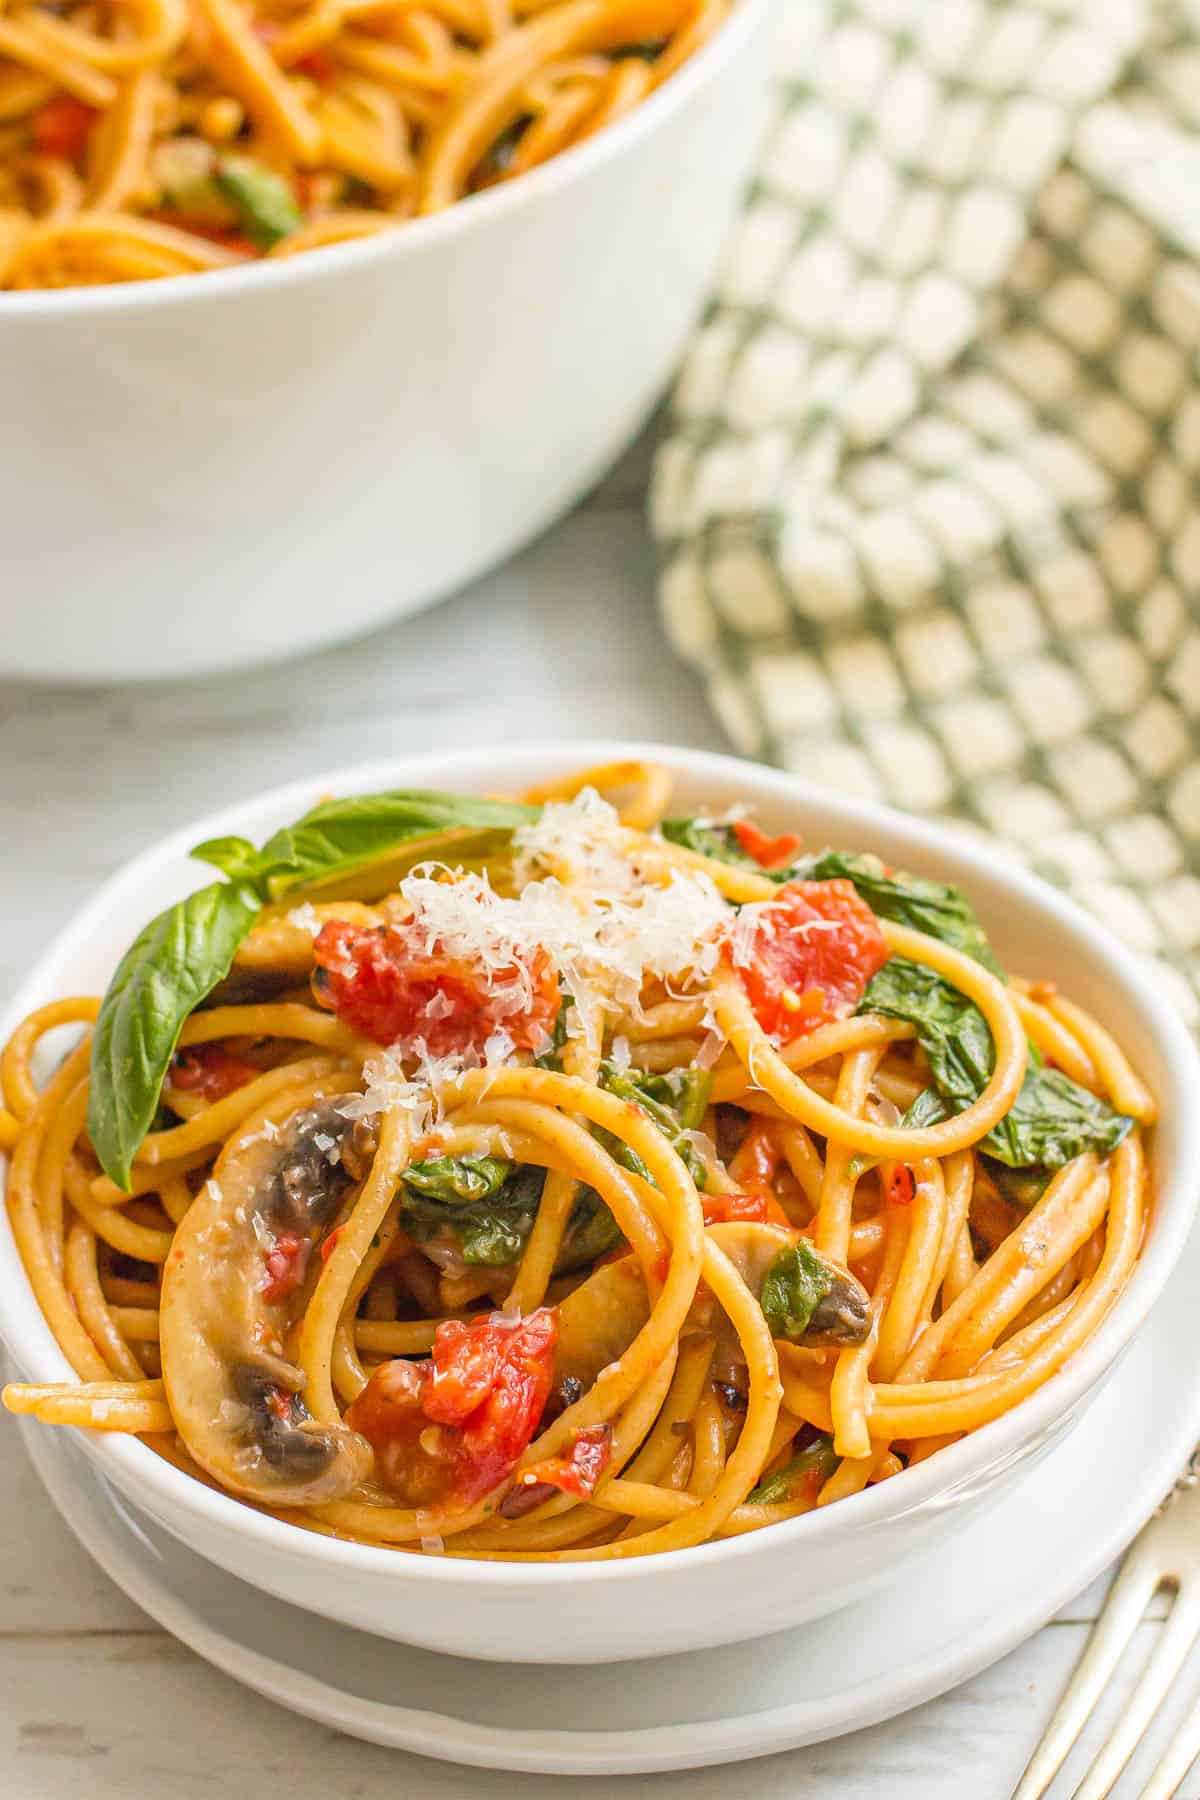 A small serving of vegetarian pasta with mushrooms, spinach and tomatoes in a white bowl set on a white plate.